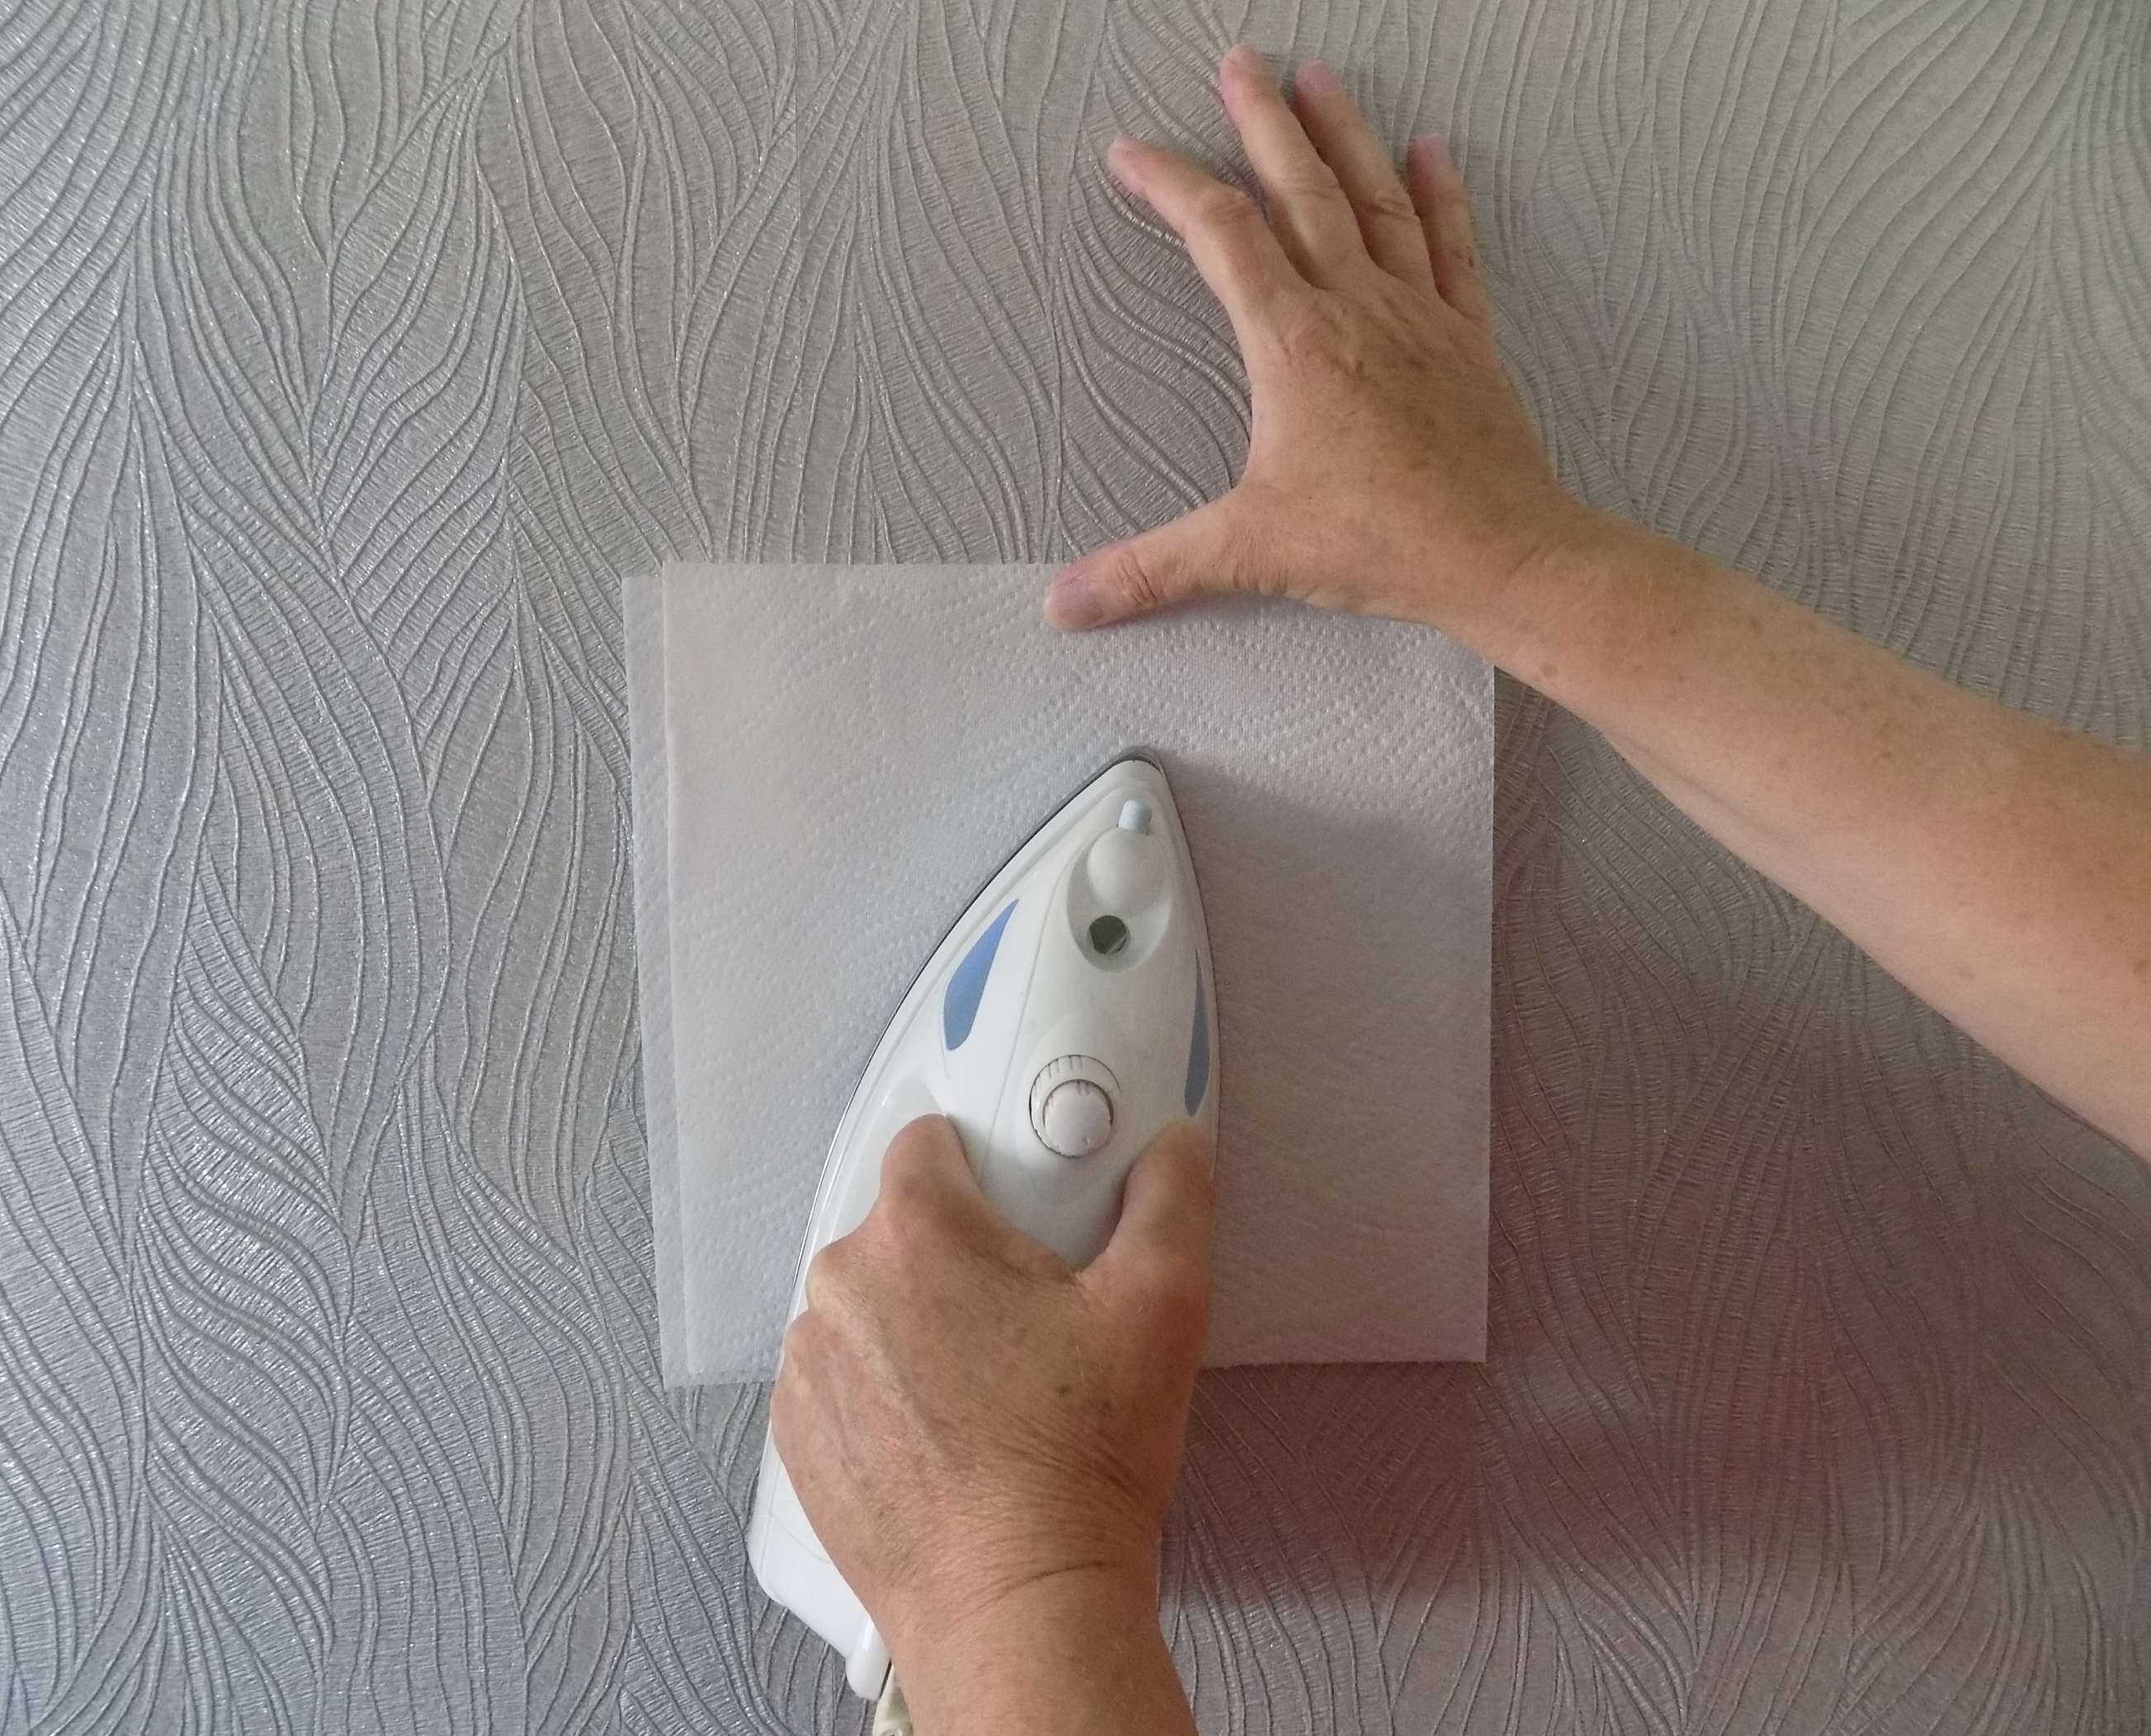 person holding iron and kitchen roll against wallpaper to clean off grease